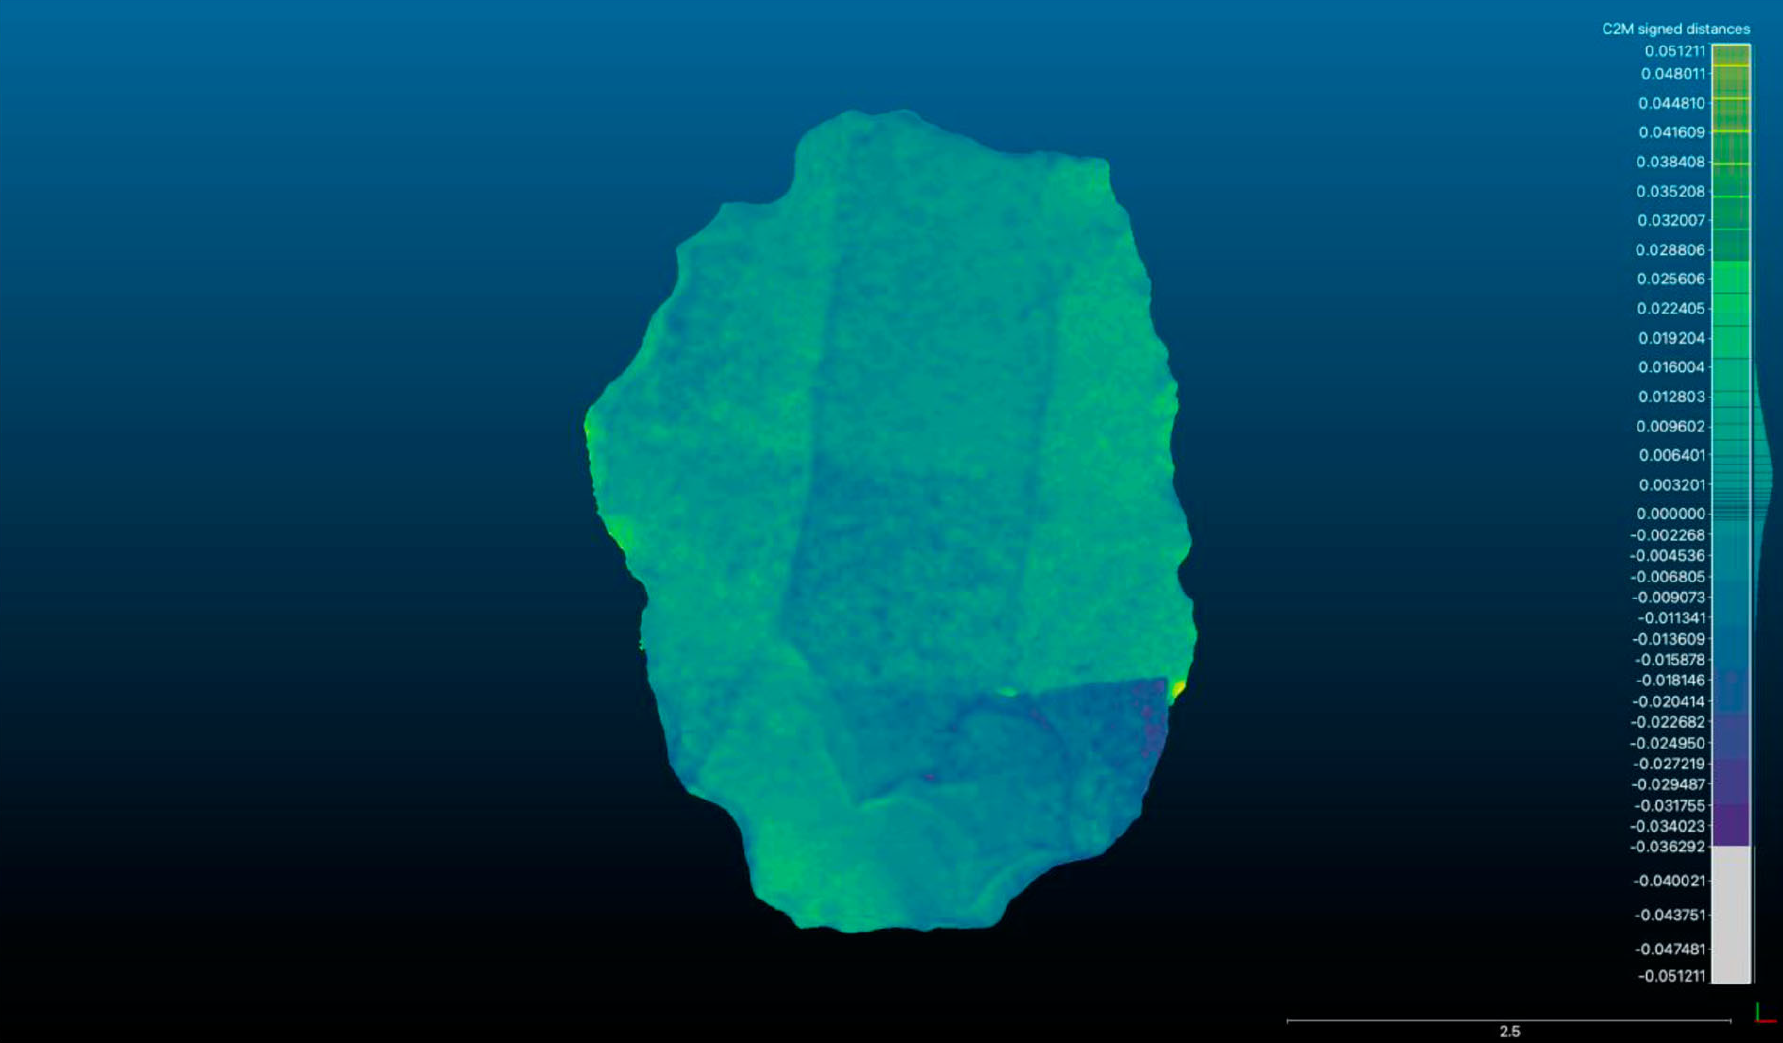 Point Cloud of a lithic artefact